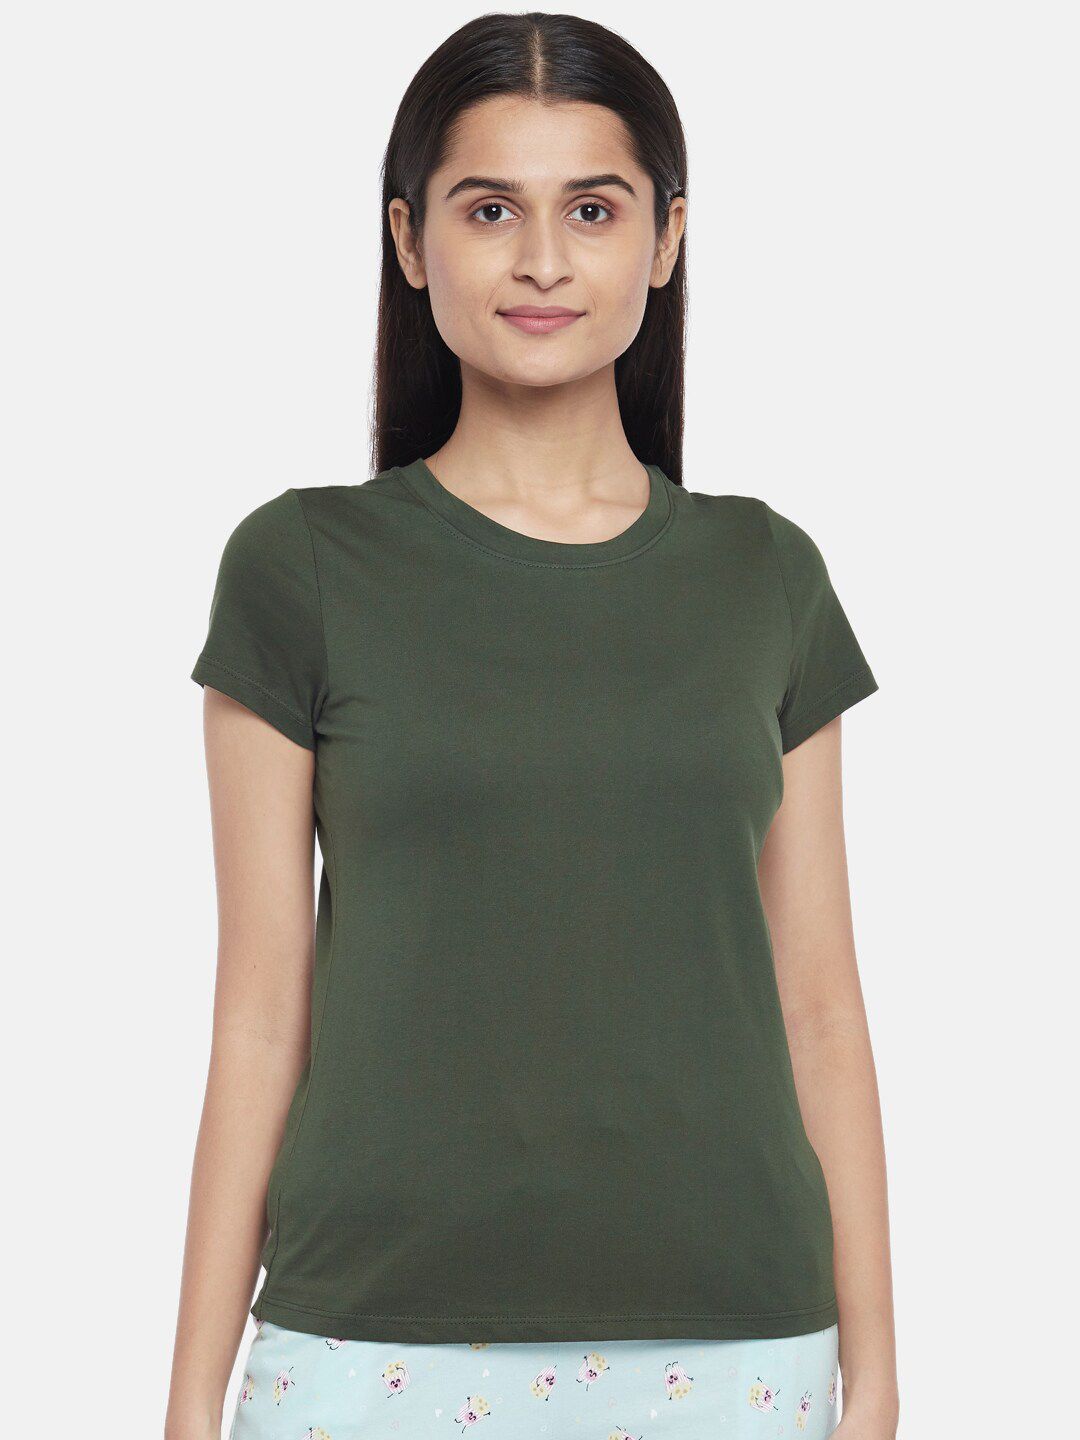 Dreamz by Pantaloons Woman Olive Green Regular Lounge tshirt Price in India